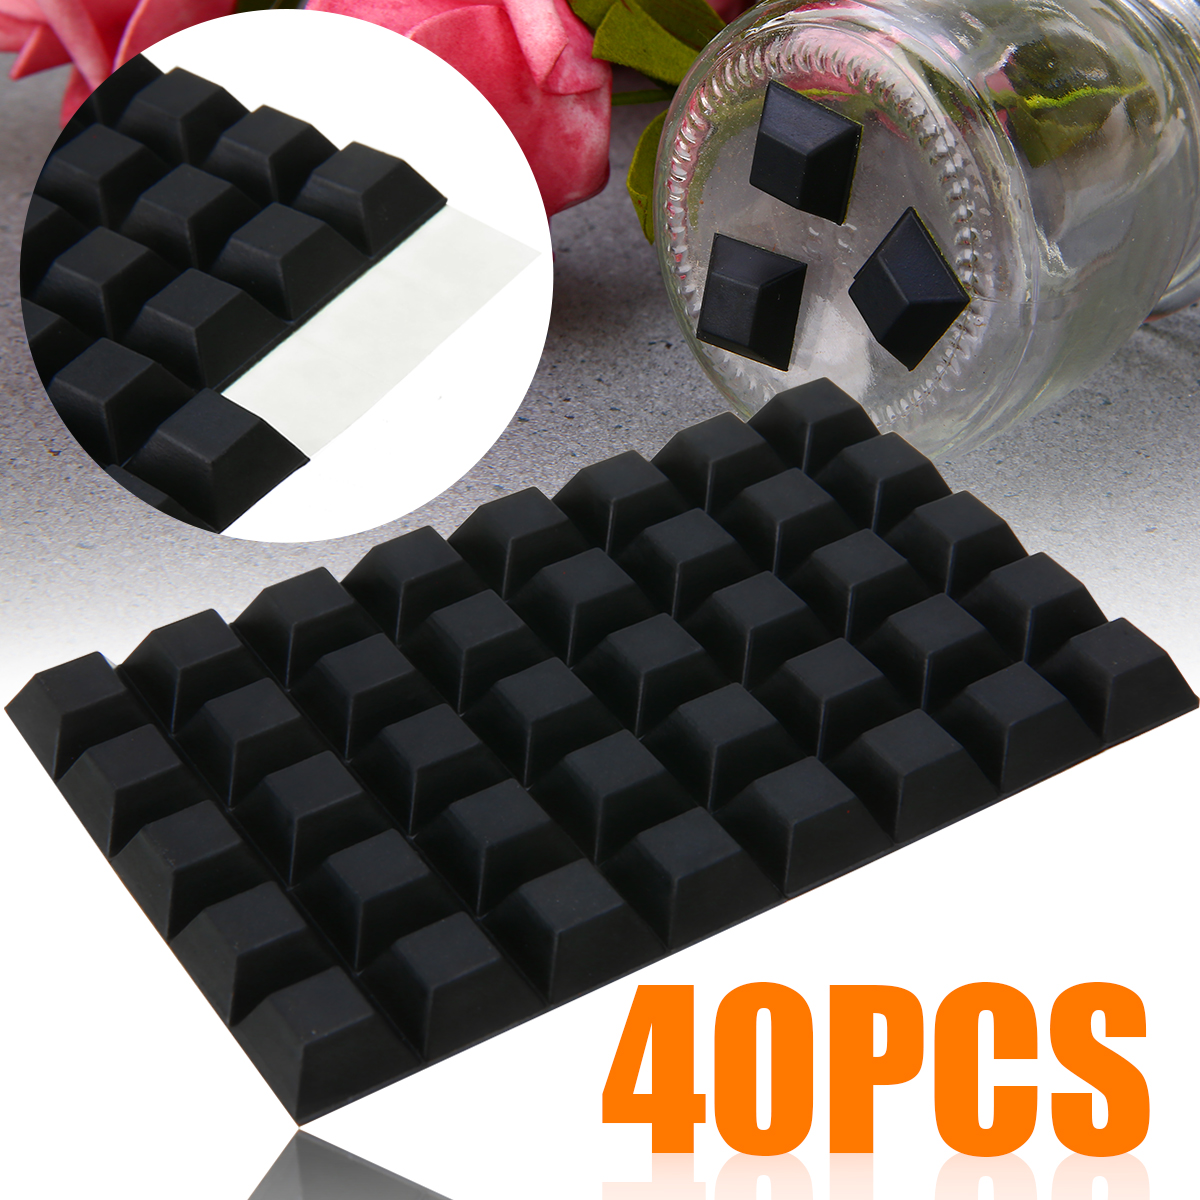 40pcs Self-Adhesive Rubber Bumper Stop Non-slip Feet Door Buffer Pads Wall  Protectors Door Stopper For Furniture Accessory Black - Price history &  Review, AliExpress Seller - Son Day Day Up Store